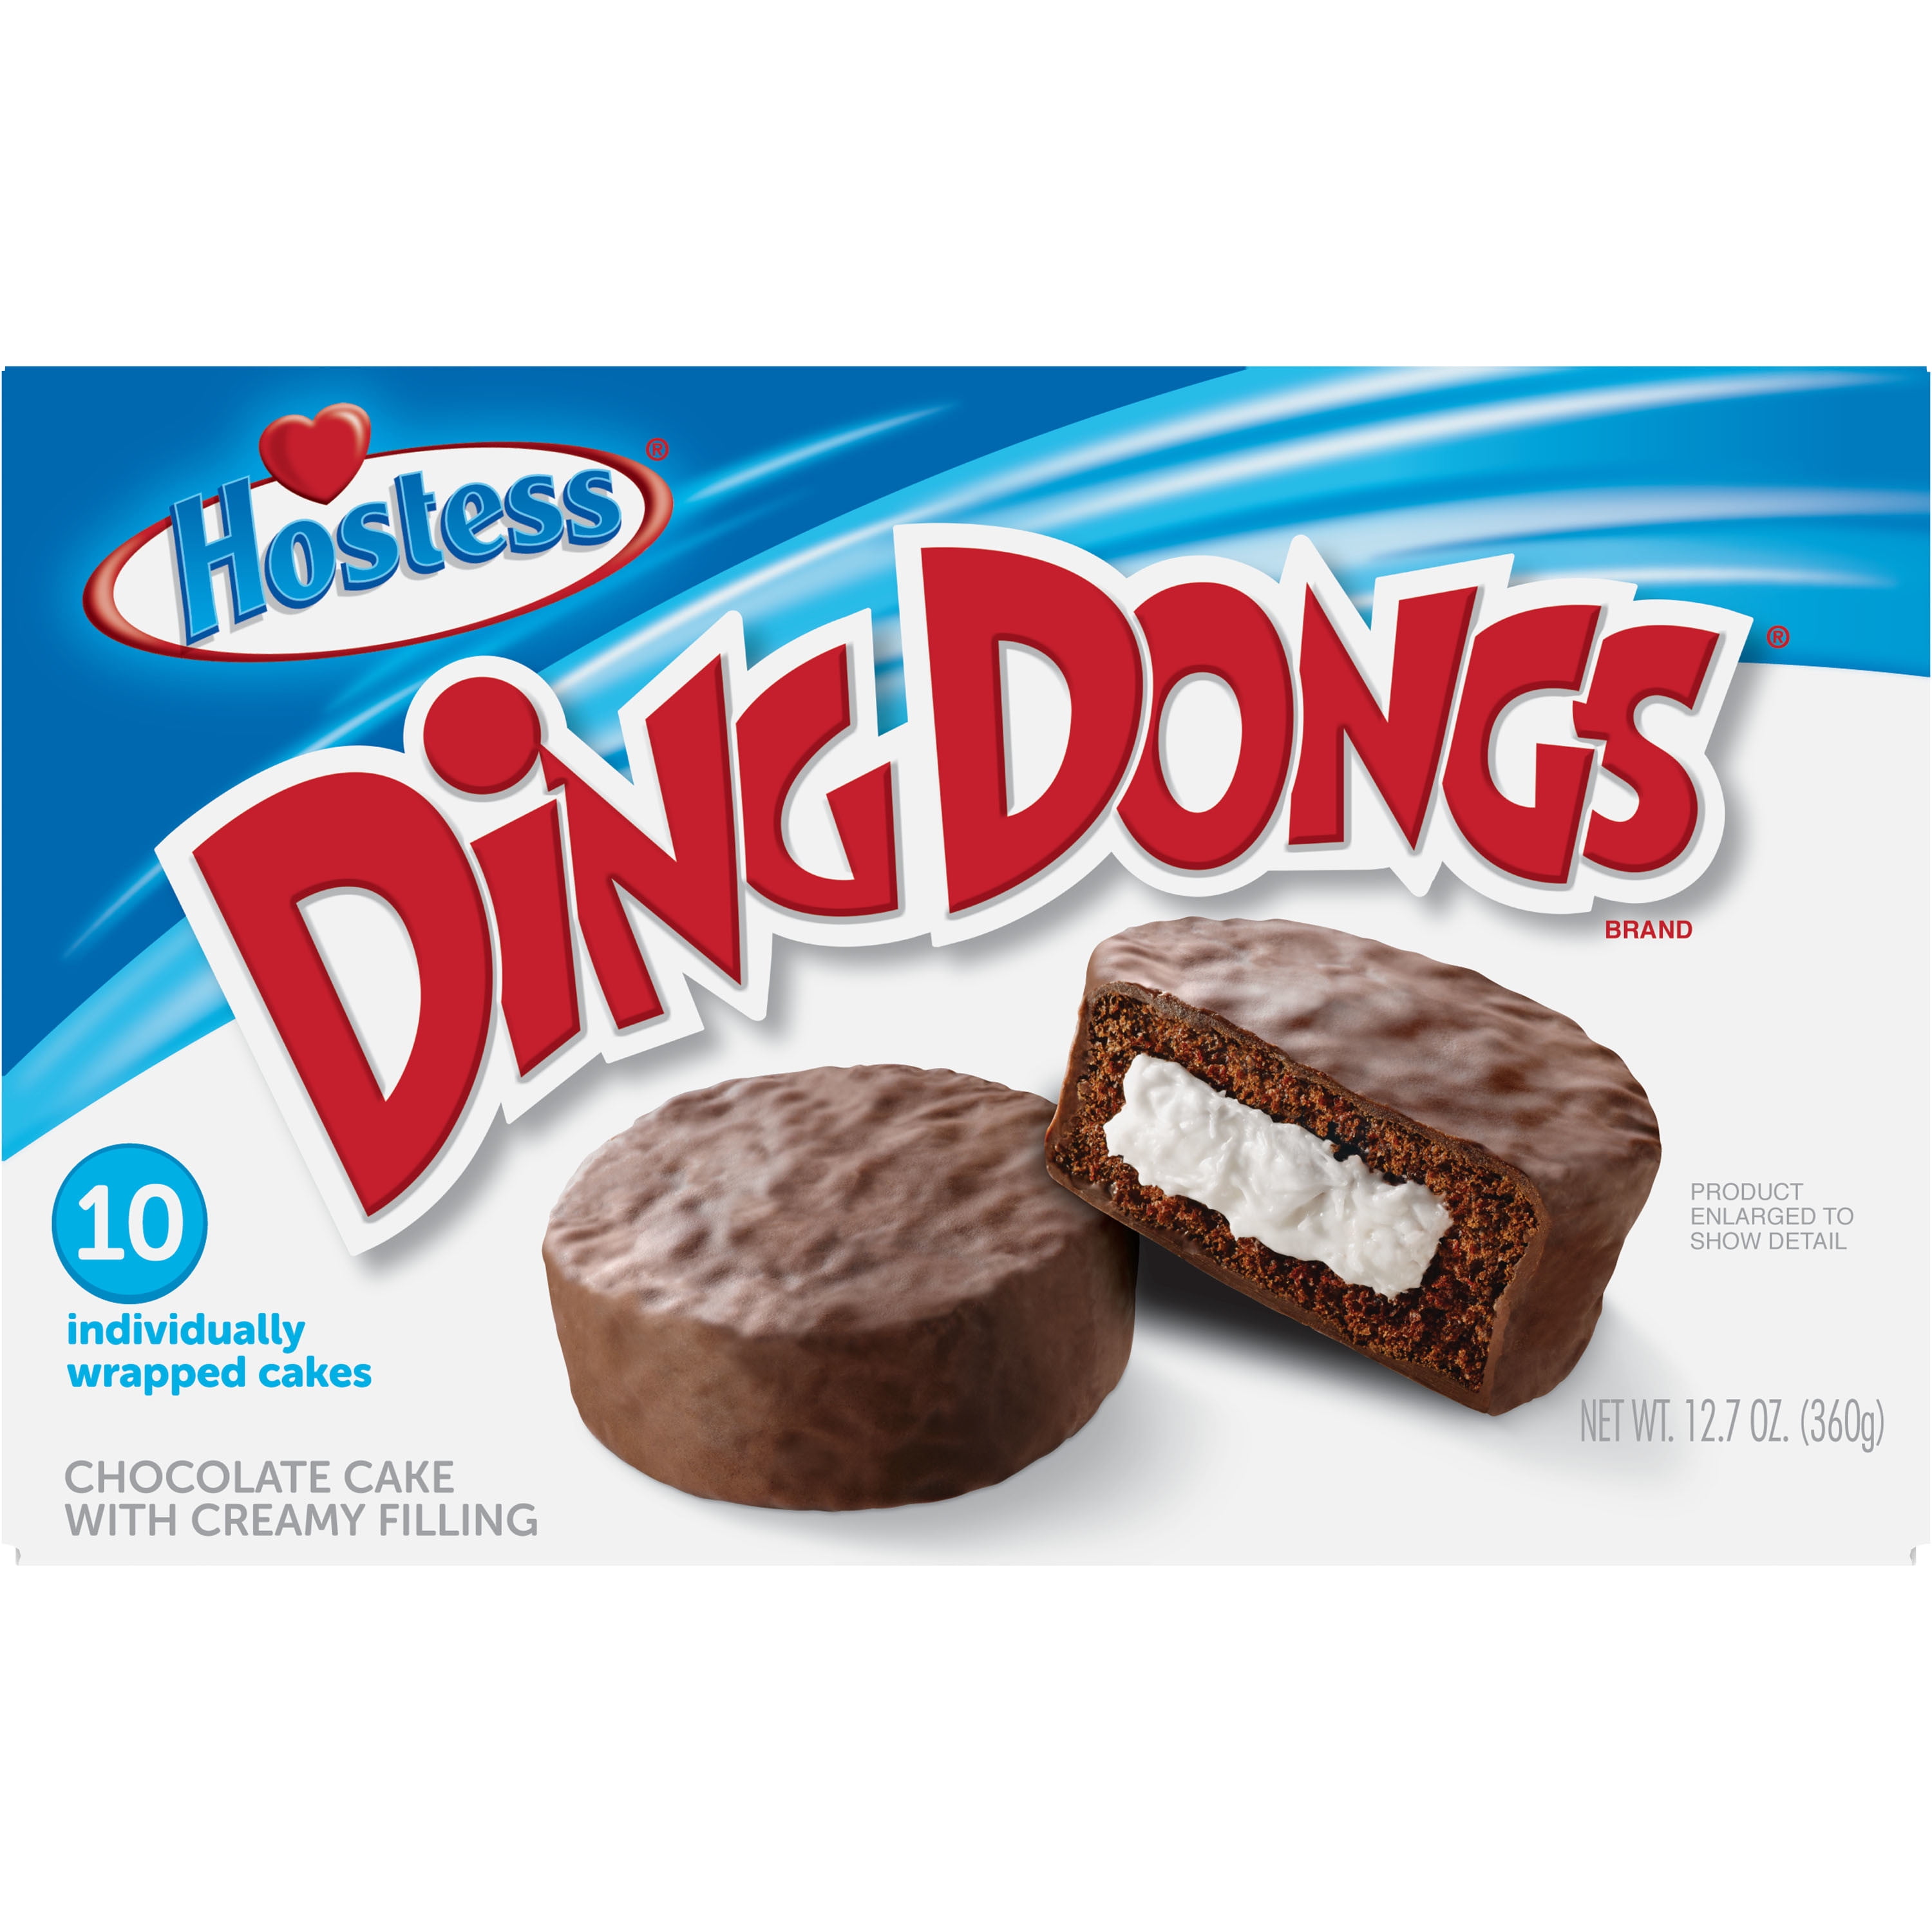 Hostess Chocolate Ding Dongs Snack Cakes, 10 count, 12.70 oz